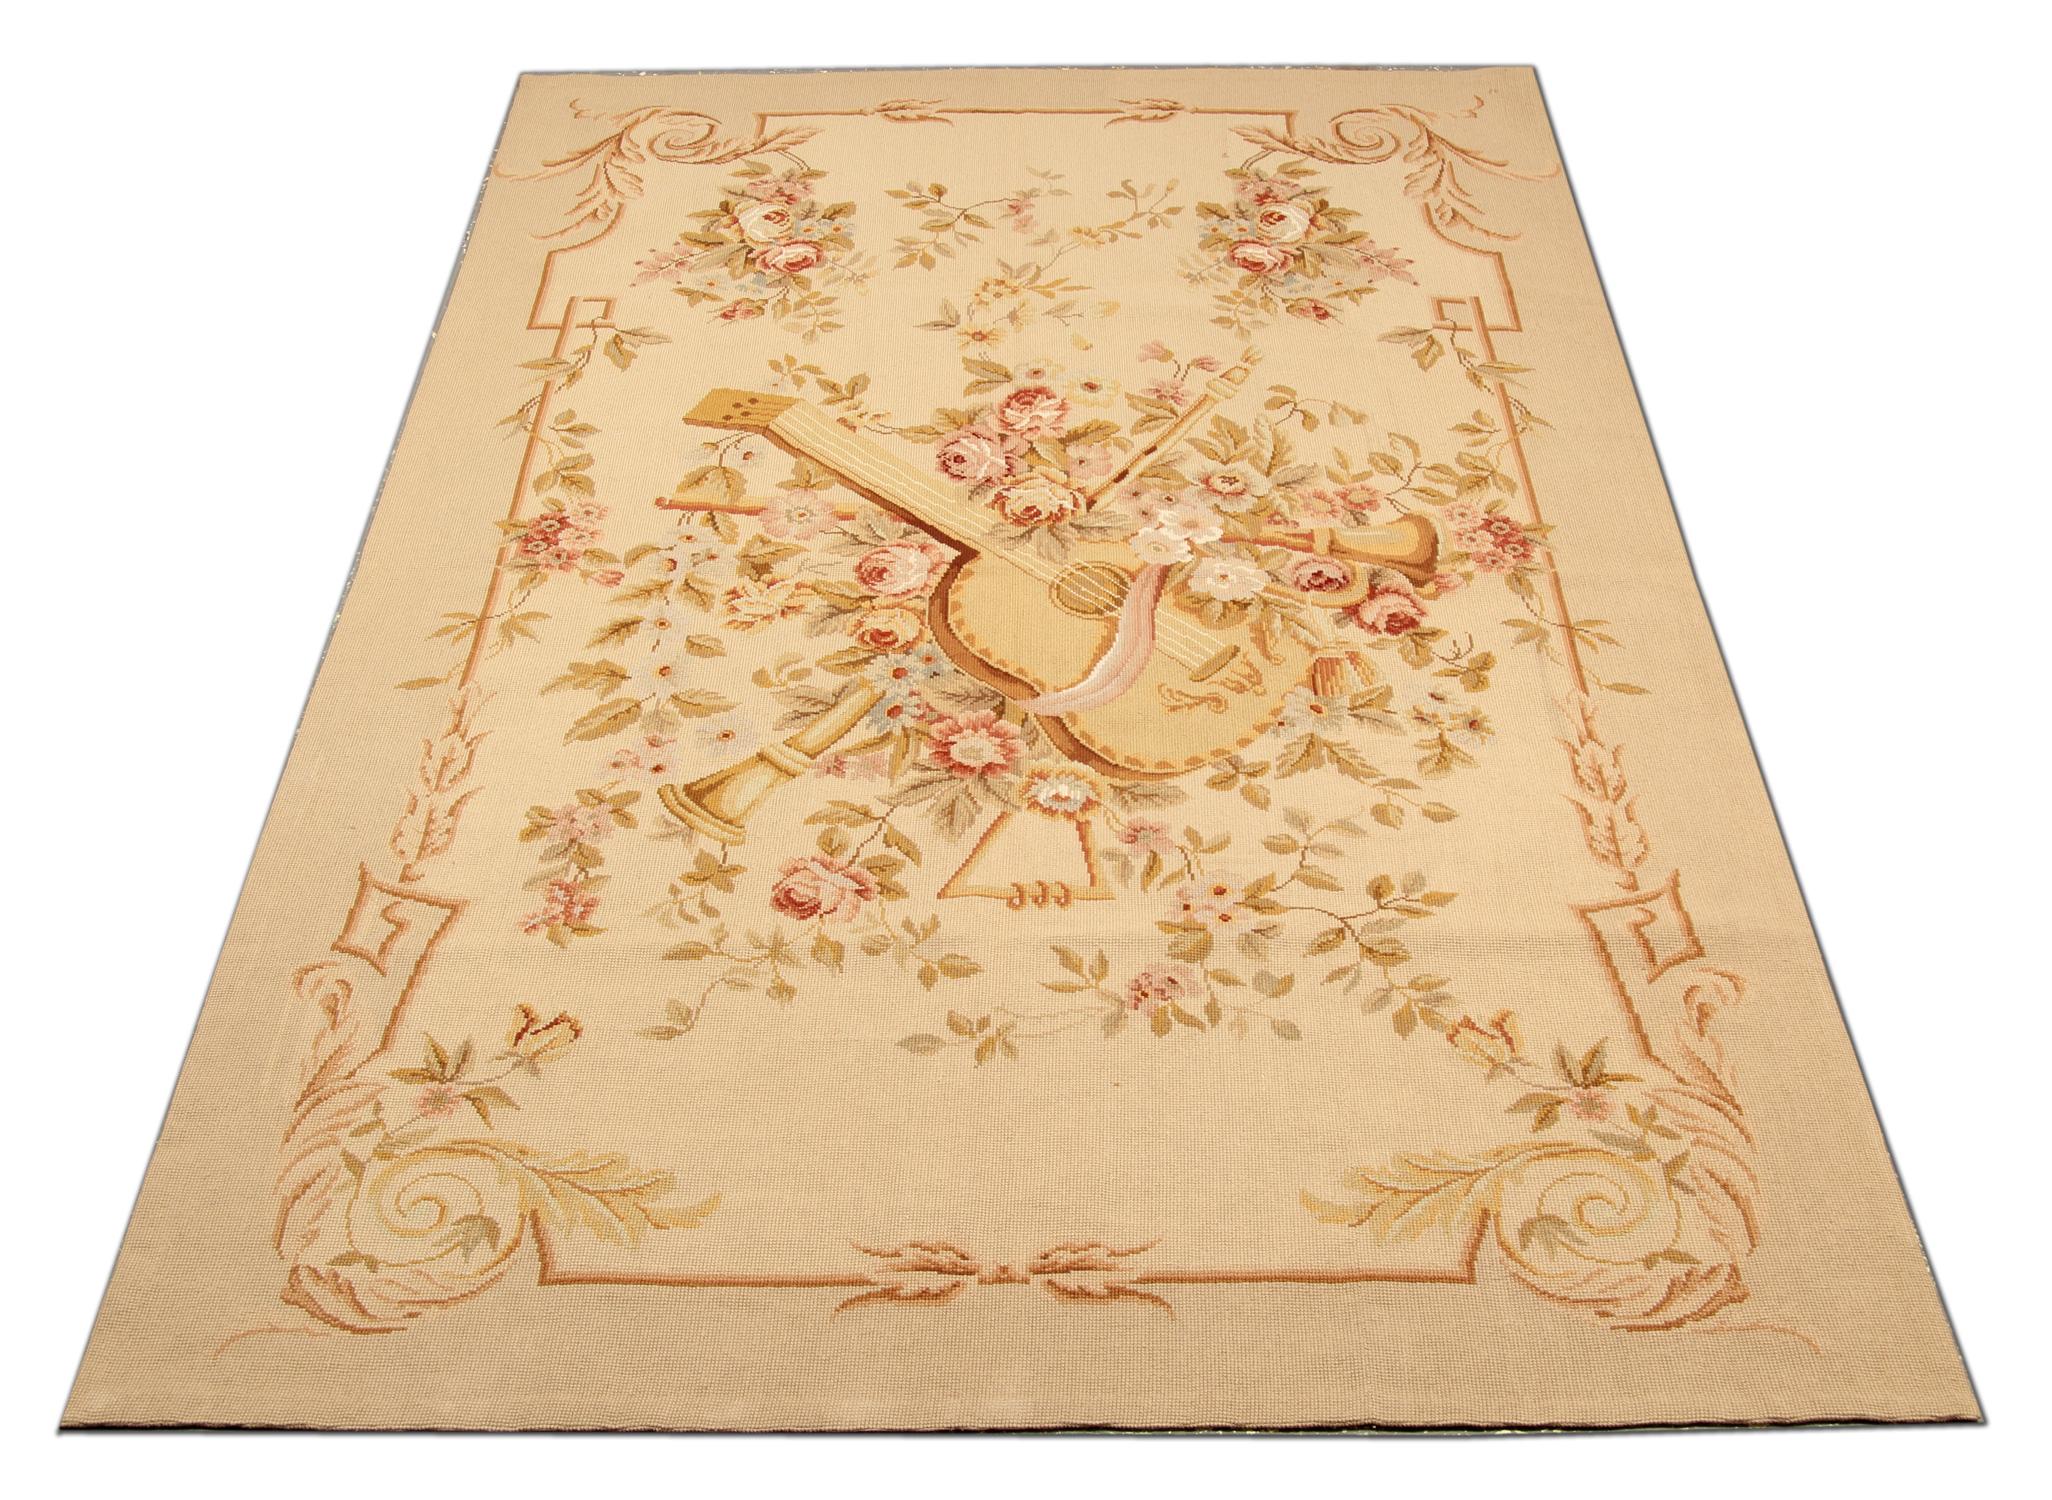 This handwoven decorative tapestry was woven in the 21st century in China. Constructed for large the western interior design market. The French style features a musical design with a guitar woven in the center surrounded by a floral bouquet. Perfect